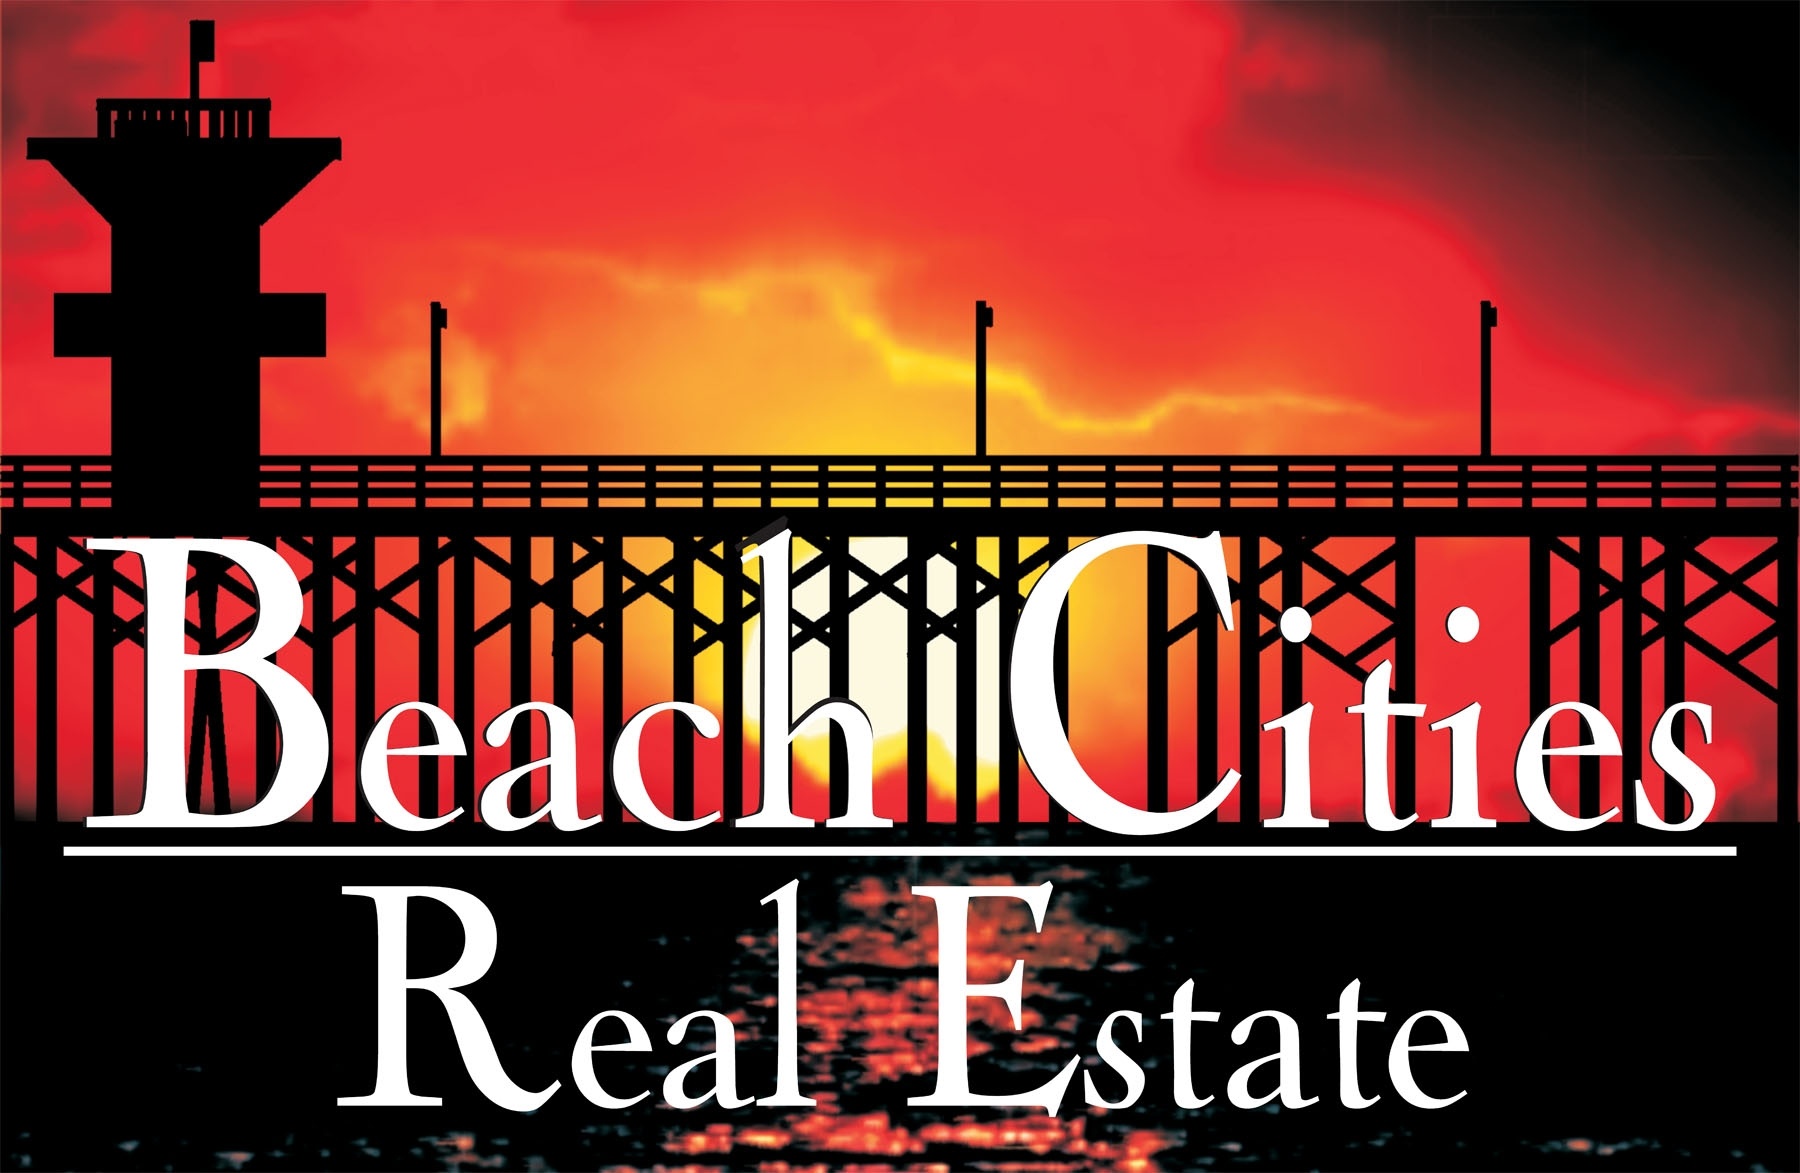 Beach Cities Real Estate - Property Evaluation